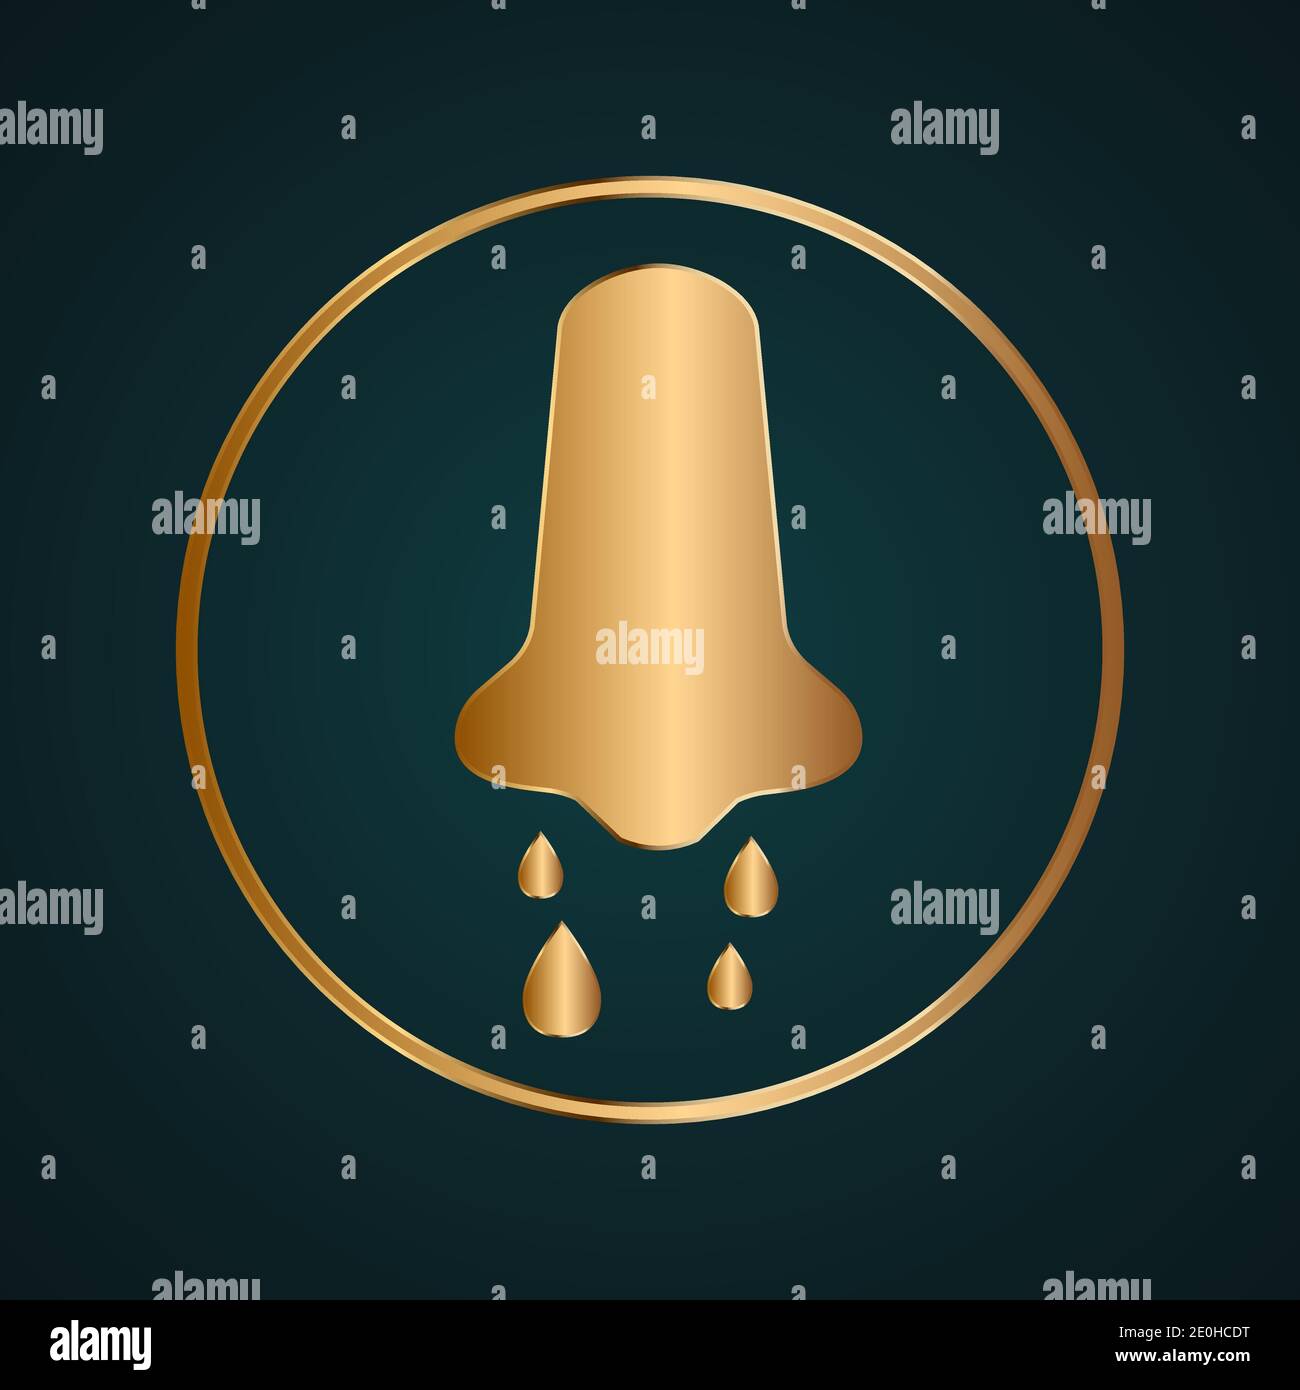 Runny human nose with symptoms of illness sign vector. Gold metal with dark background Stock Vector